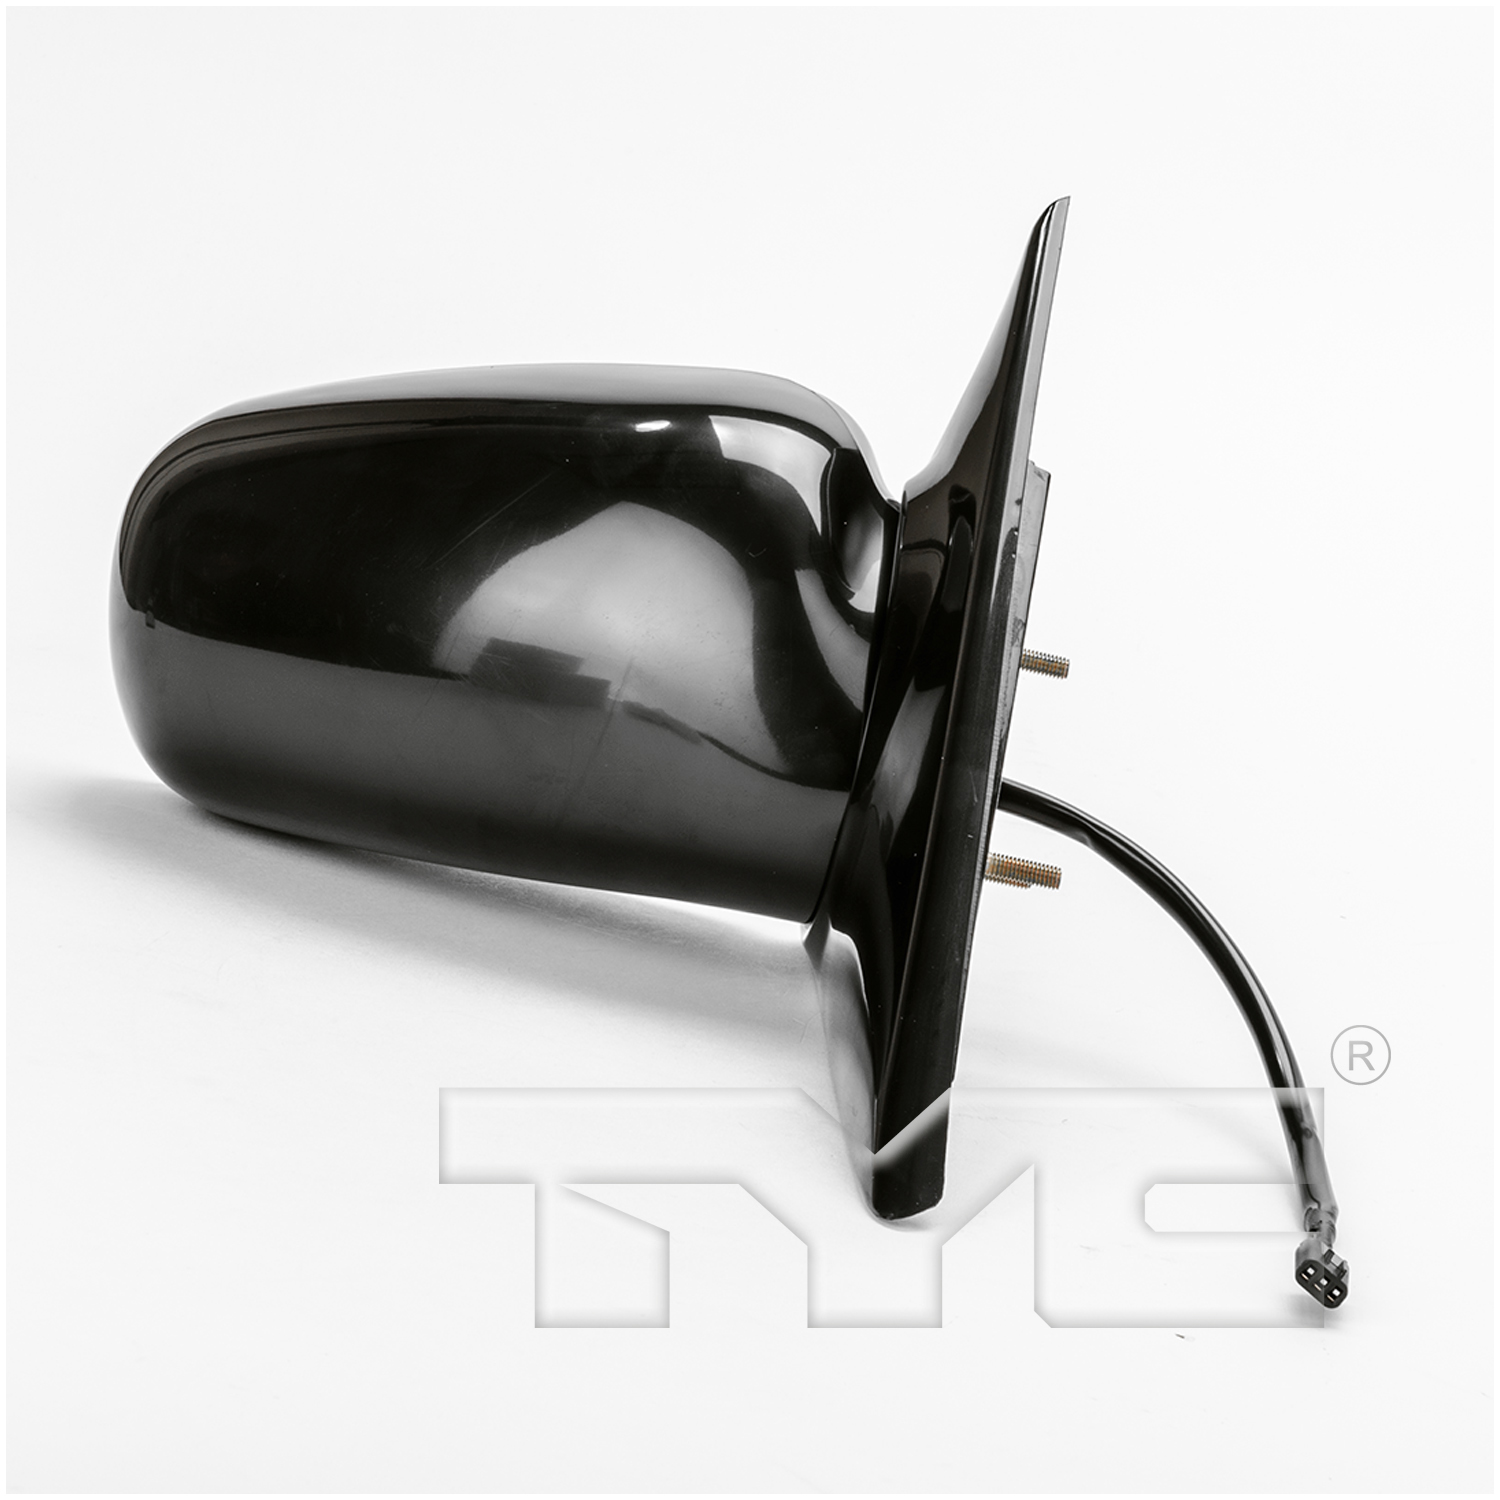 Aftermarket MIRRORS for OLDSMOBILE - CUTLASS, CUTLASS,97-99,RT Mirror outside rear view